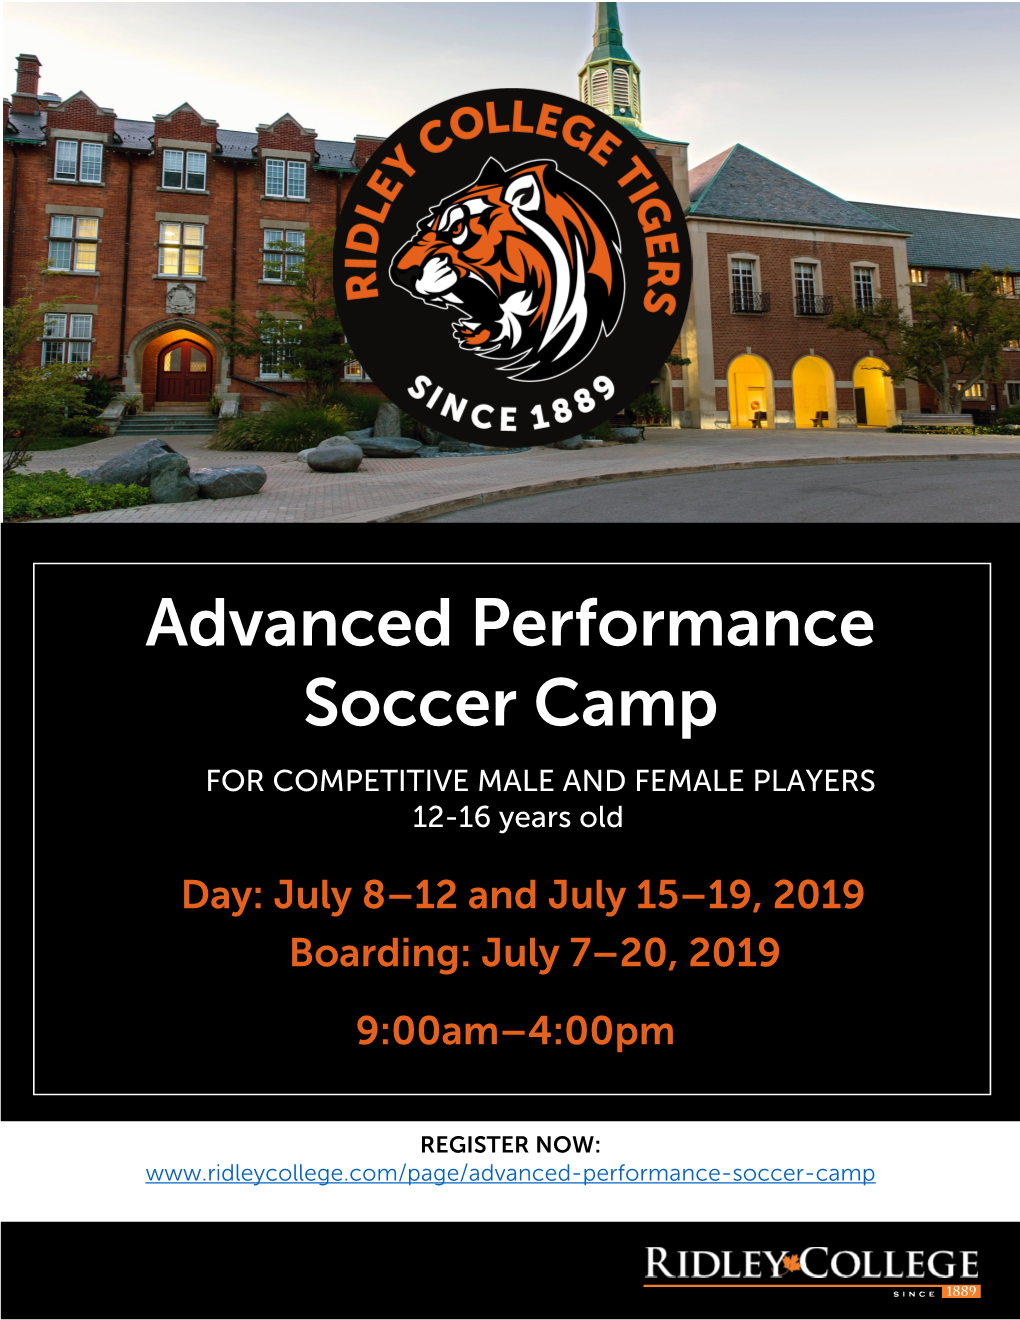 Advanced Performance Soccer Camp for COMPETITIVE MALE and FEMALE PLAYERS 12-16 Years Old